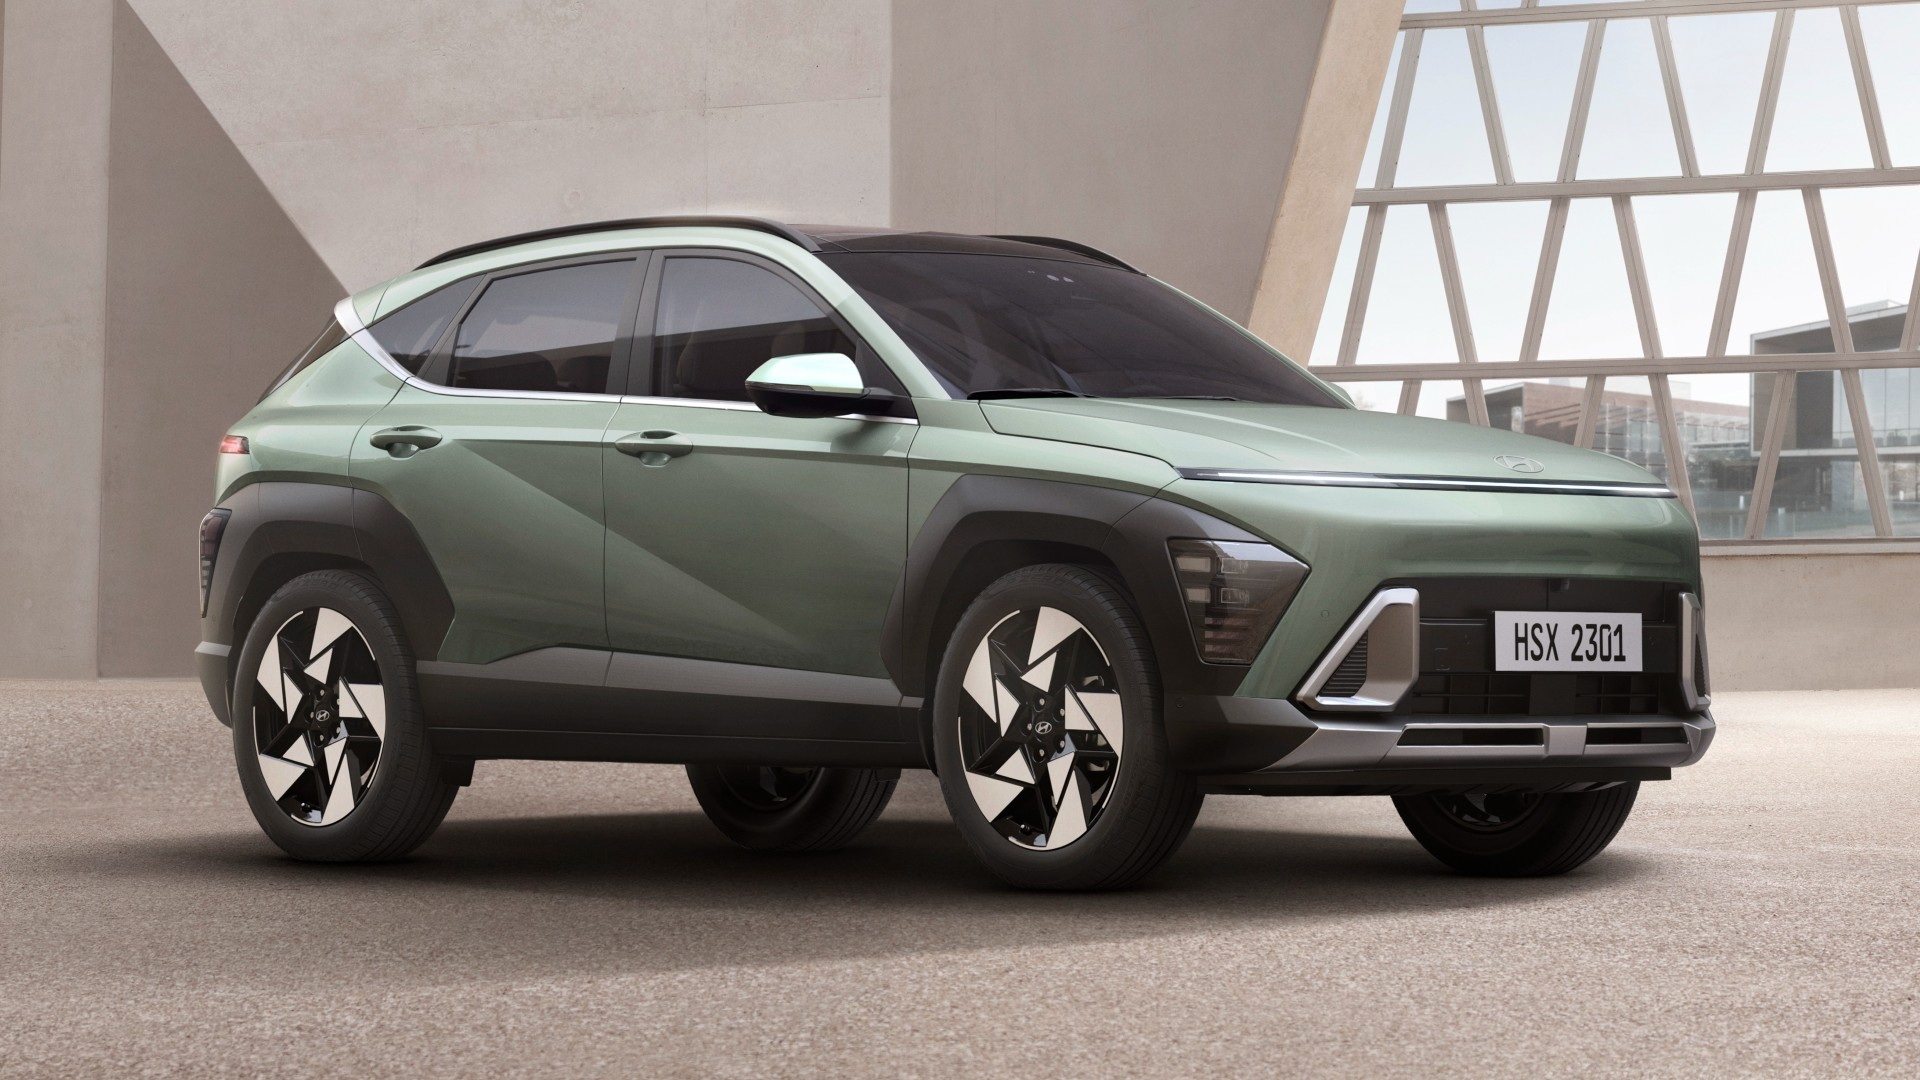 Hyundai Shows Us More Of The New Kona, Details ICE And Hybrid